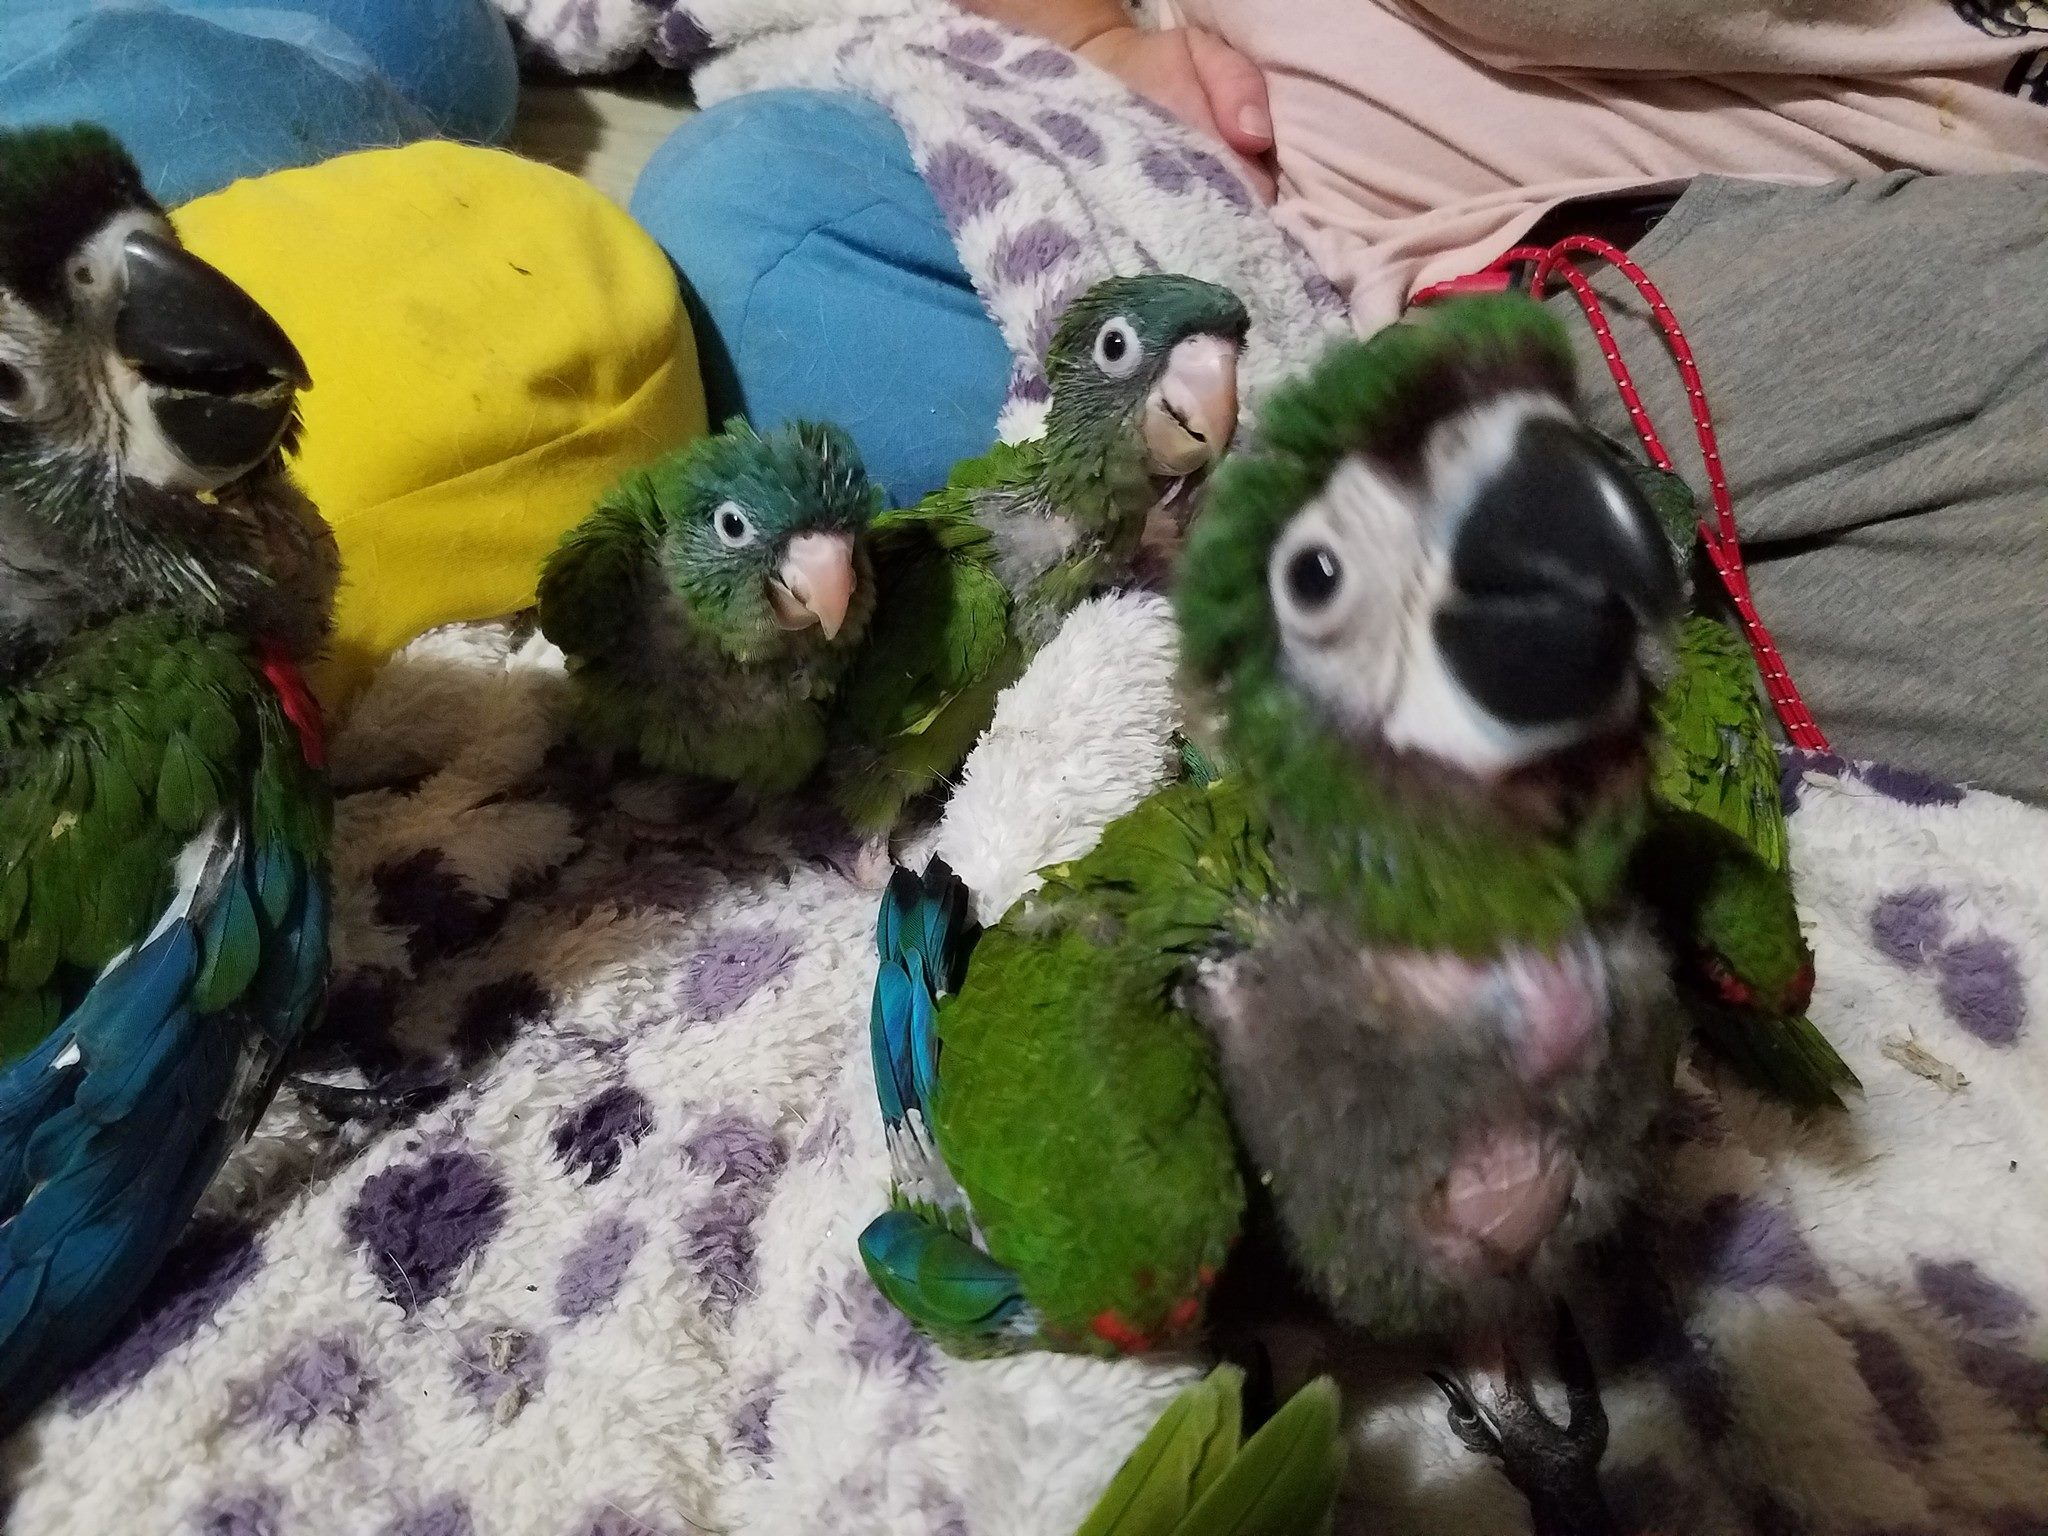 Severe Macaws Handraised Babies We Sell Handfed Baby Birds,Cooking Kitchen Sets For Kids